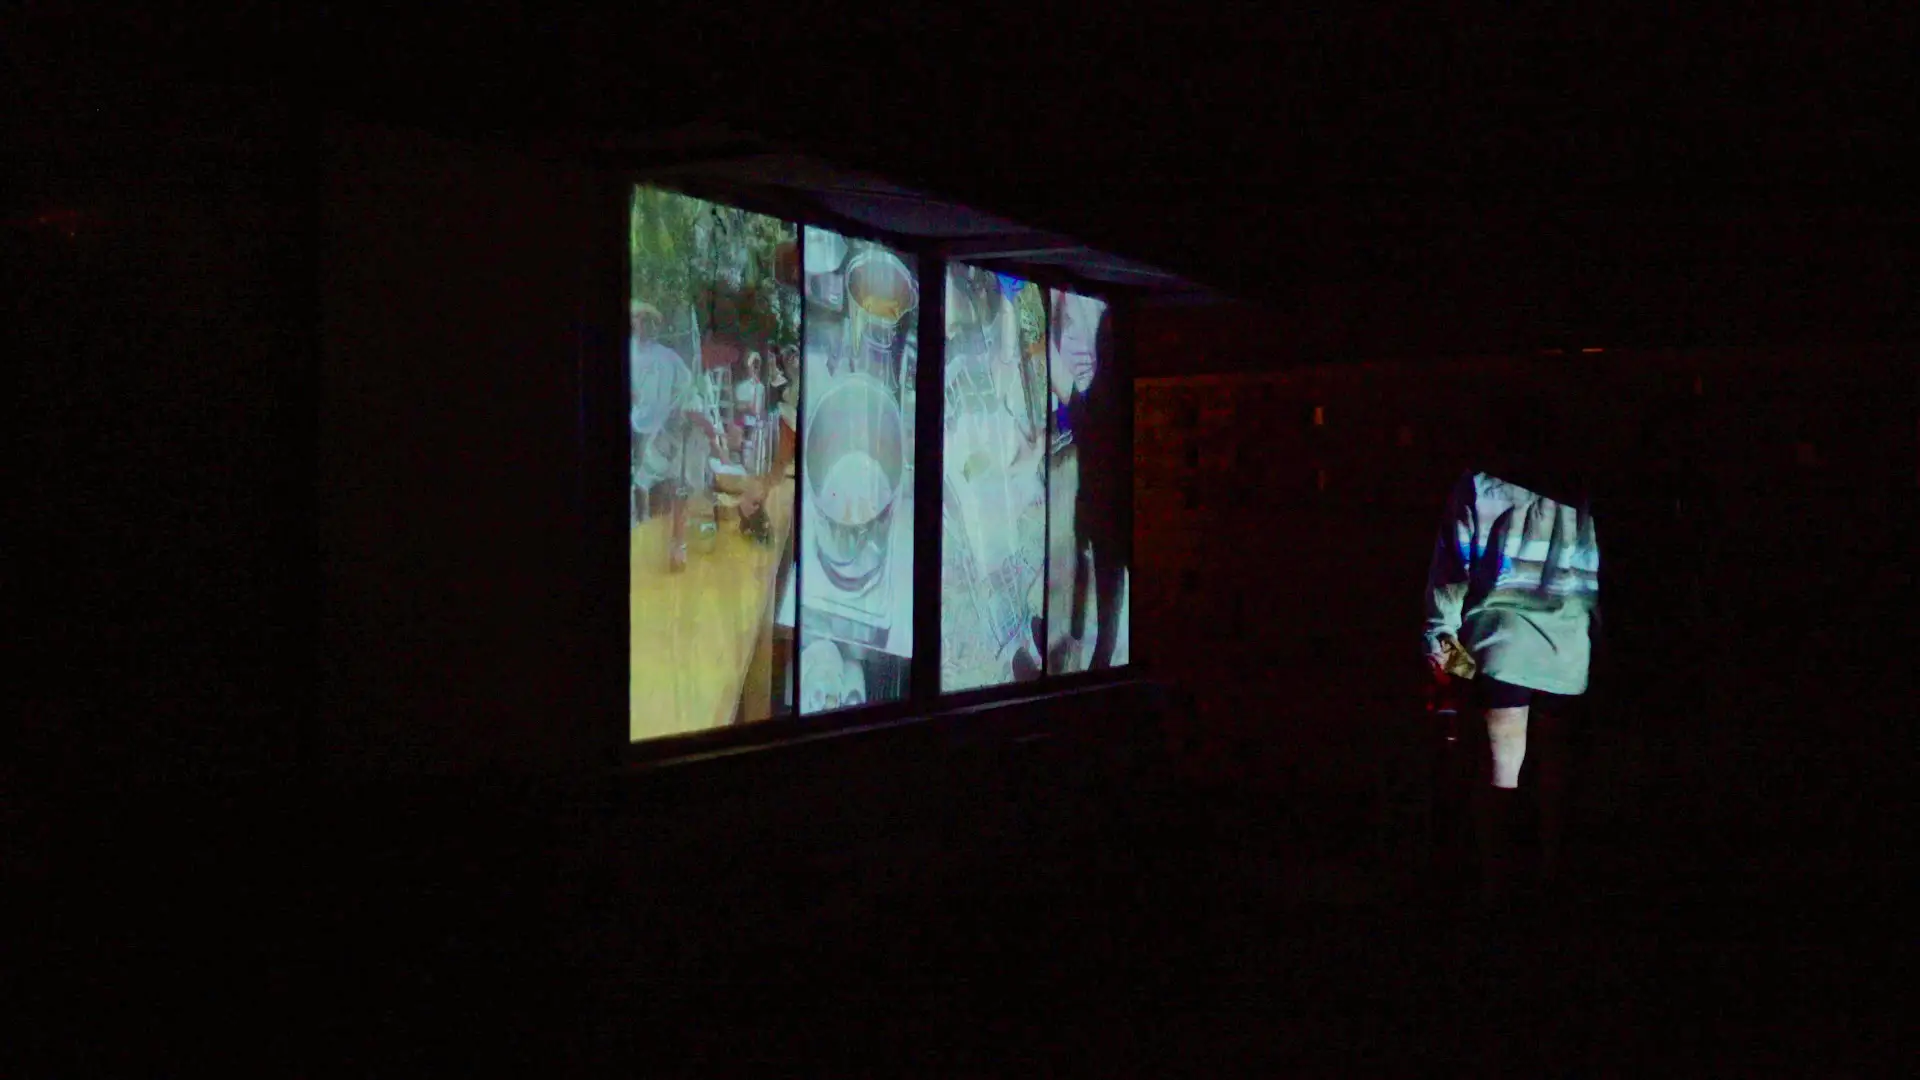 Someone stands in front of the projecting, blocking part of one of the four moving images.